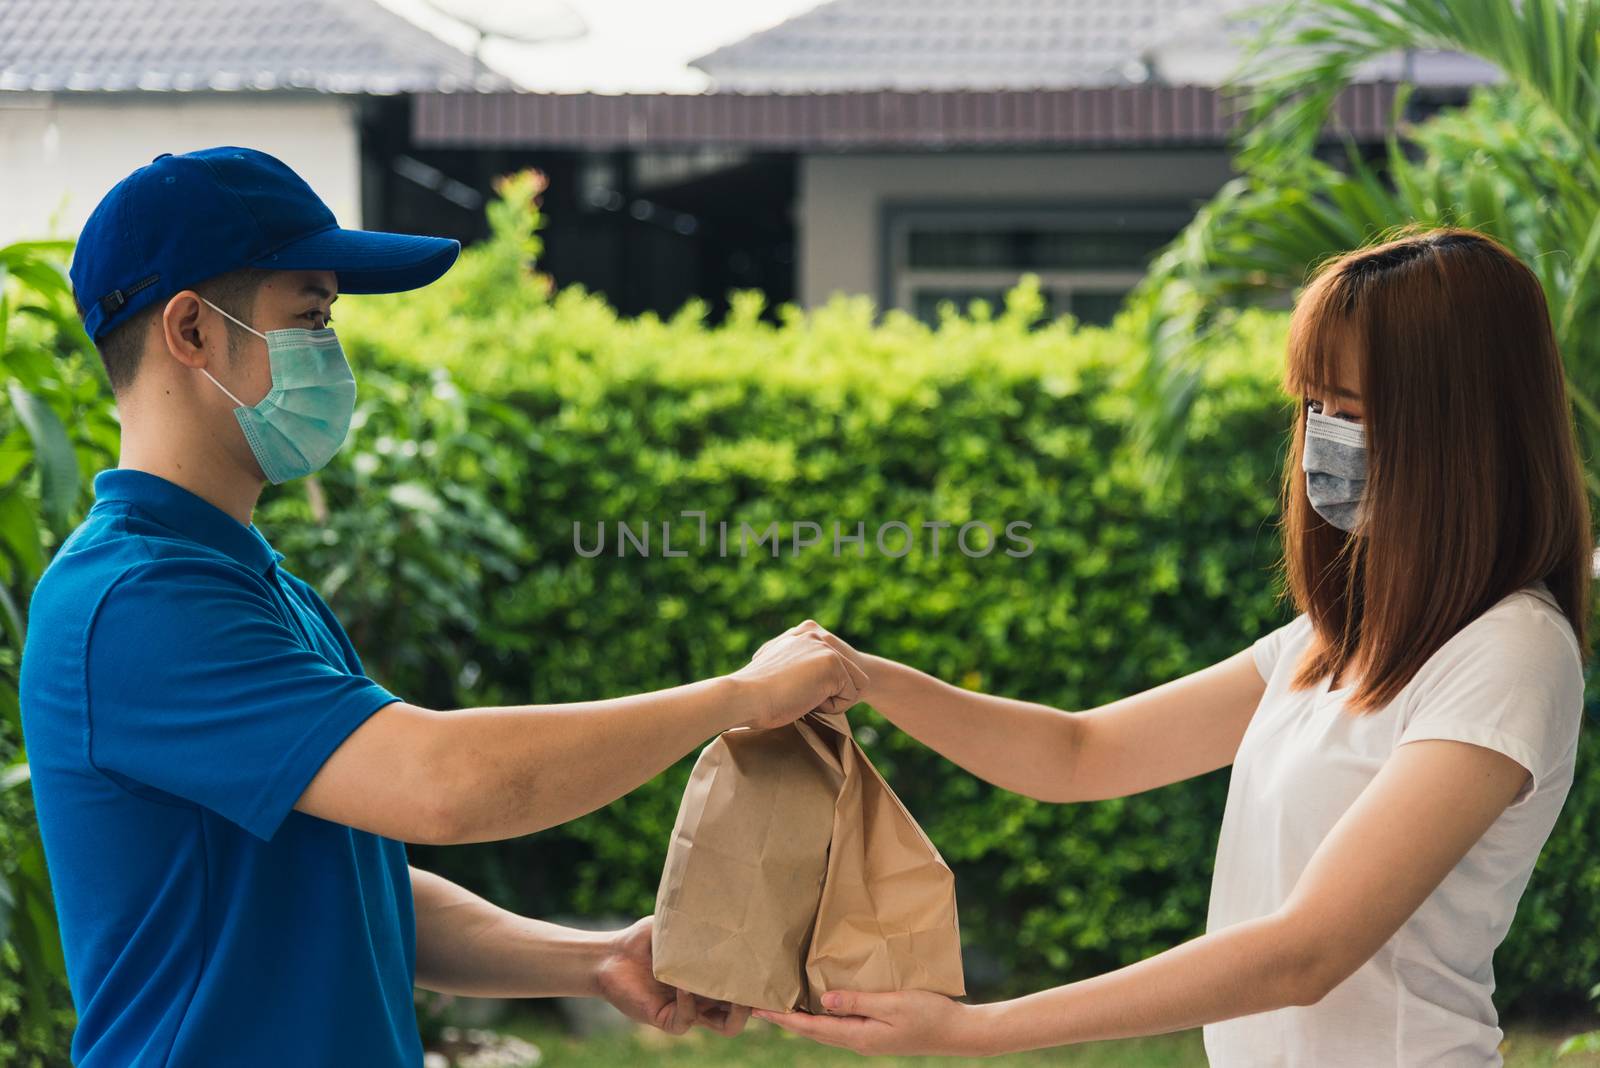 Asian delivery express courier young man giving paper bags fast food to woman customer receiving both protective face mask, under curfew quarantine pandemic coronavirus COVID-19